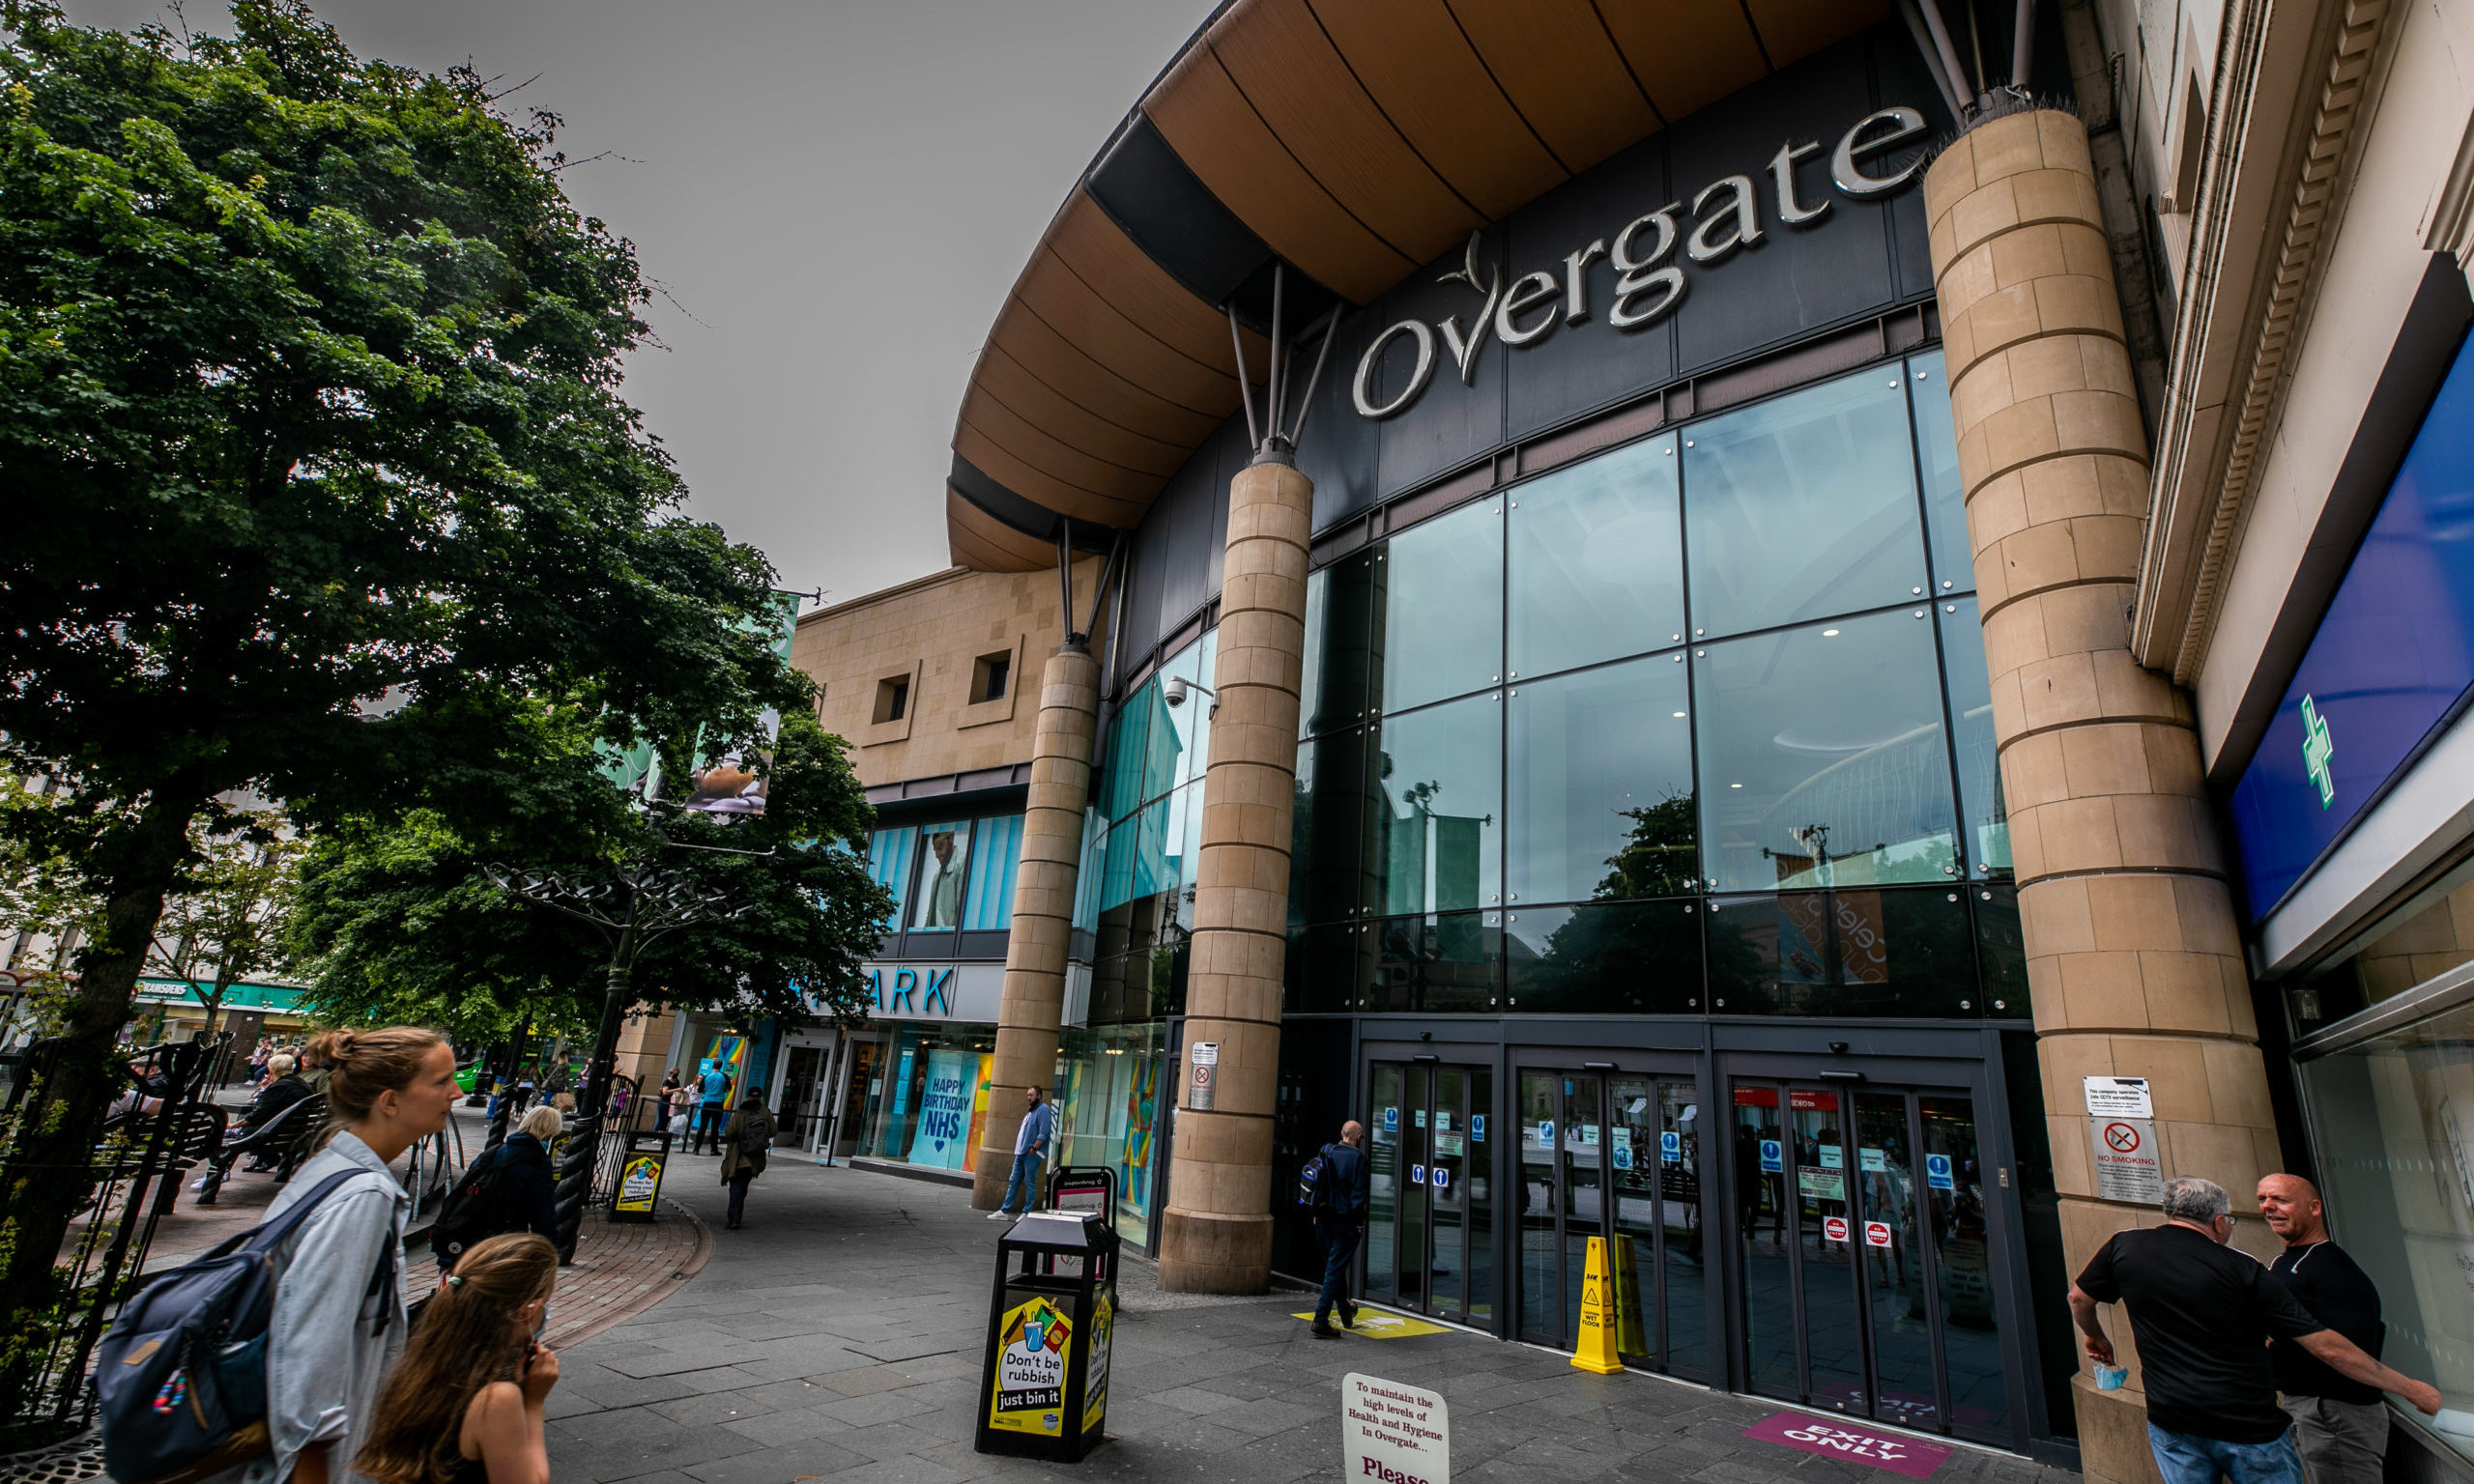 The Overgate Shopping Centre in Dundee.